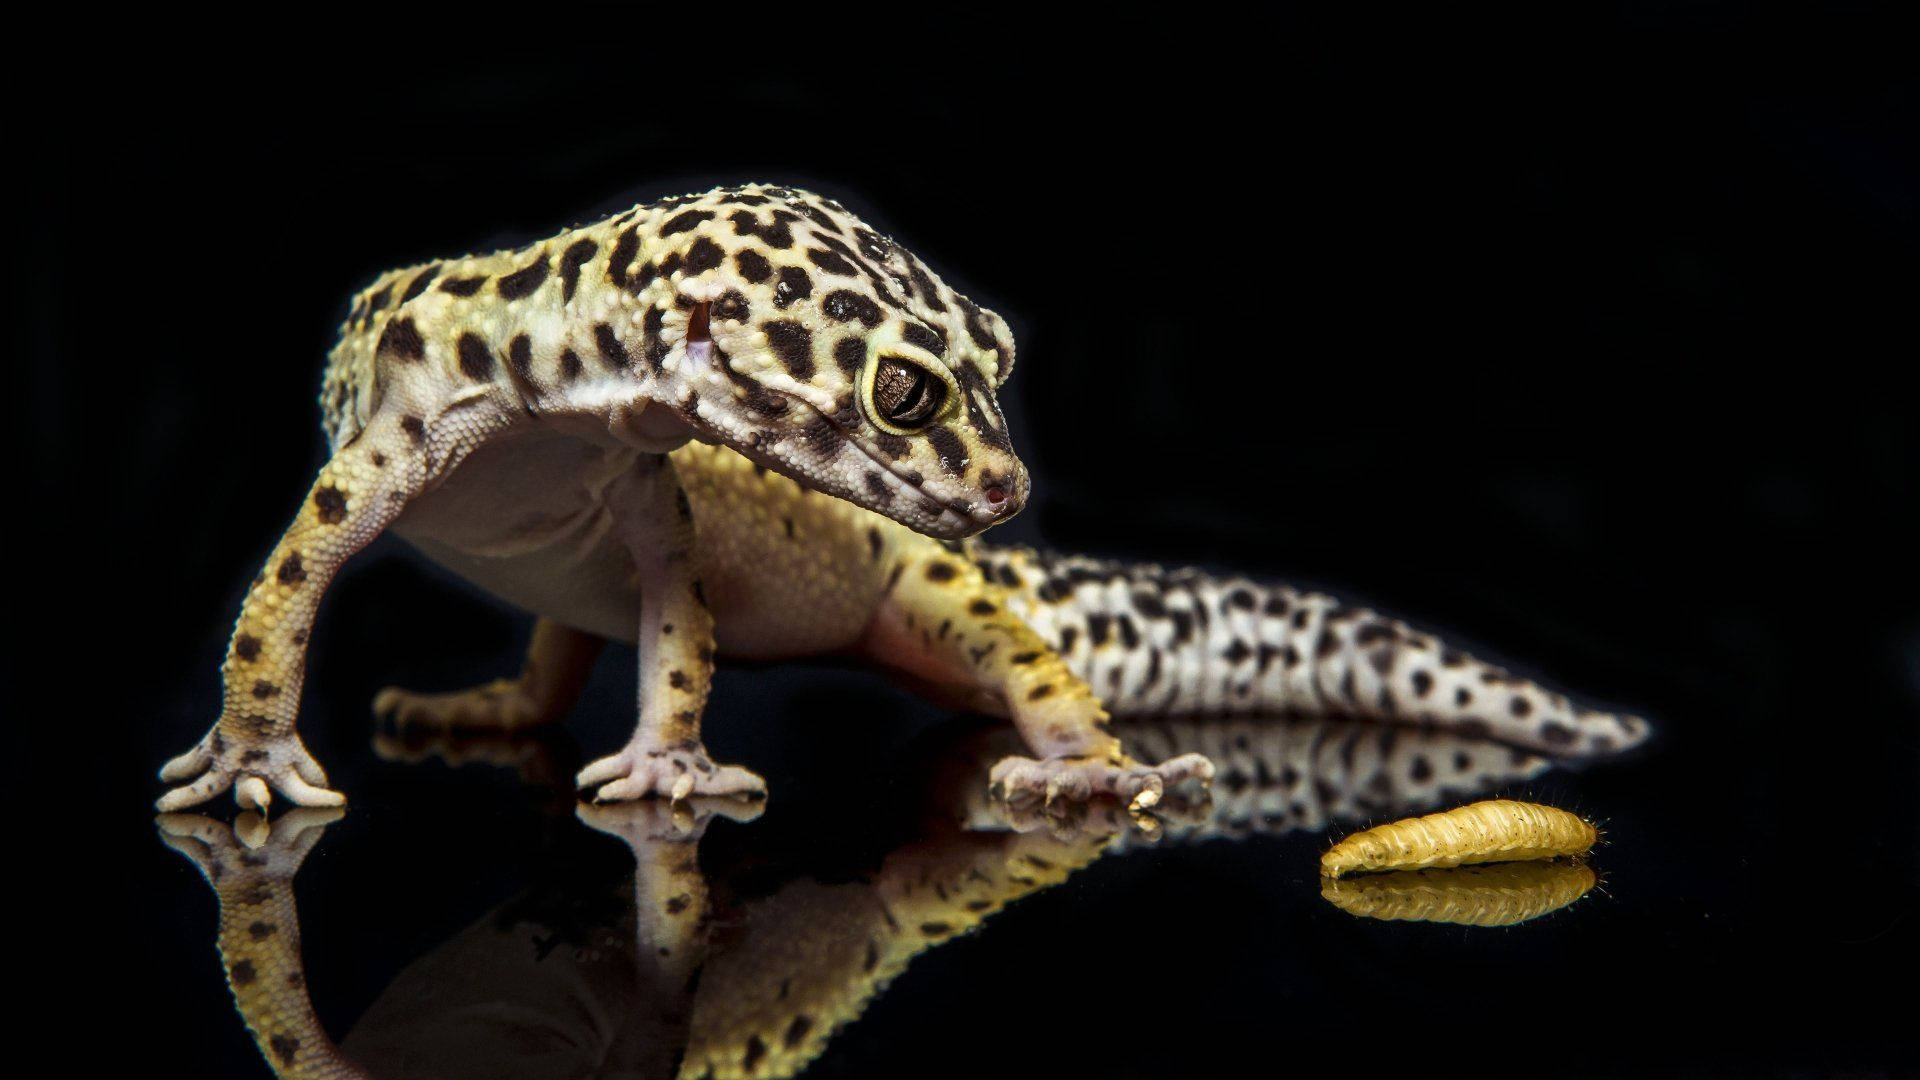 Black Spotted Gecko With Worm Wallpaper